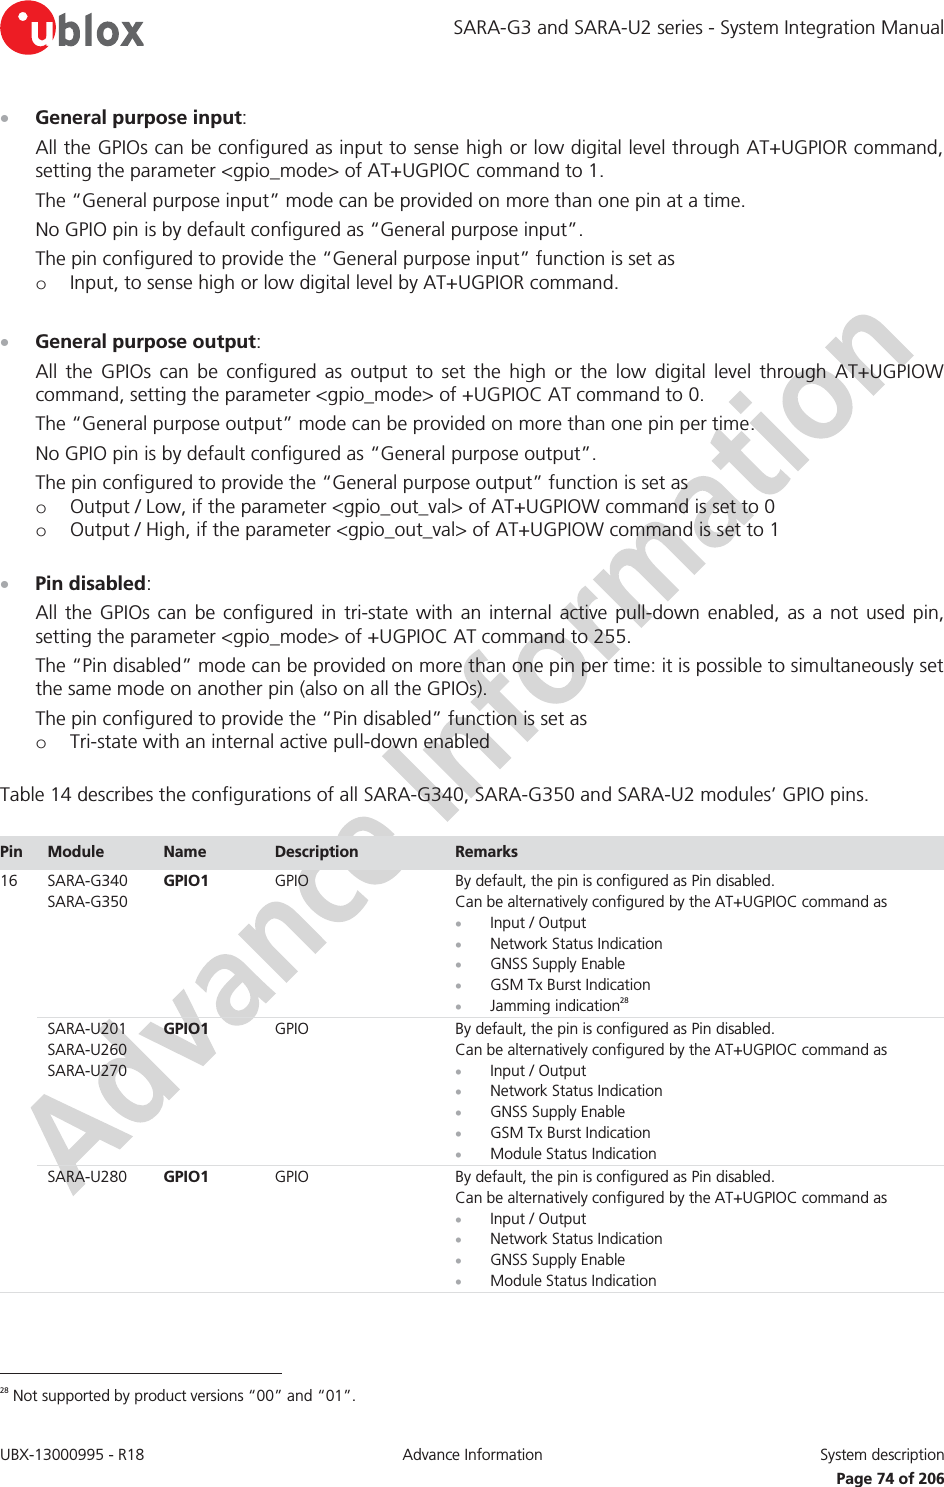 SARA-G3 and SARA-U2 series - System Integration Manual UBX-13000995 - R18  Advance Information  System description   Page 74 of 206 x General purpose input: All the GPIOs can be configured as input to sense high or low digital level through AT+UGPIOR command, setting the parameter &lt;gpio_mode&gt; of AT+UGPIOC command to 1. The “General purpose input” mode can be provided on more than one pin at a time. No GPIO pin is by default configured as “General purpose input”. The pin configured to provide the “General purpose input” function is set as o Input, to sense high or low digital level by AT+UGPIOR command.  x General purpose output: All the GPIOs can be configured as output to set the high or the low digital level through AT+UGPIOW command, setting the parameter &lt;gpio_mode&gt; of +UGPIOC AT command to 0. The “General purpose output” mode can be provided on more than one pin per time. No GPIO pin is by default configured as “General purpose output”. The pin configured to provide the “General purpose output” function is set as o Output / Low, if the parameter &lt;gpio_out_val&gt; of AT+UGPIOW command is set to 0 o Output / High, if the parameter &lt;gpio_out_val&gt; of AT+UGPIOW command is set to 1  x Pin disabled: All the GPIOs can be configured in tri-state with an internal active pull-down enabled, as a not used pin, setting the parameter &lt;gpio_mode&gt; of +UGPIOC AT command to 255. The “Pin disabled” mode can be provided on more than one pin per time: it is possible to simultaneously set the same mode on another pin (also on all the GPIOs). The pin configured to provide the “Pin disabled” function is set as o Tri-state with an internal active pull-down enabled  Table 14 describes the configurations of all SARA-G340, SARA-G350 and SARA-U2 modules’ GPIO pins.  Pin Module  Name  Description  Remarks 16 SARA-G340 SARA-G350 GPIO1 GPIO By default, the pin is configured as Pin disabled. Can be alternatively configured by the AT+UGPIOC command as x Input / Output x Network Status Indication x GNSS Supply Enable x GSM Tx Burst Indication x Jamming indication28  SARA-U201 SARA-U260 SARA-U270 GPIO1 GPIO By default, the pin is configured as Pin disabled. Can be alternatively configured by the AT+UGPIOC command as x Input / Output x Network Status Indication x GNSS Supply Enable x GSM Tx Burst Indication x Module Status Indication  SARA-U280 GPIO1 GPIO By default, the pin is configured as Pin disabled. Can be alternatively configured by the AT+UGPIOC command as x Input / Output x Network Status Indication x GNSS Supply Enable x Module Status Indication                                                       28 Not supported by product versions “00” and “01”. 